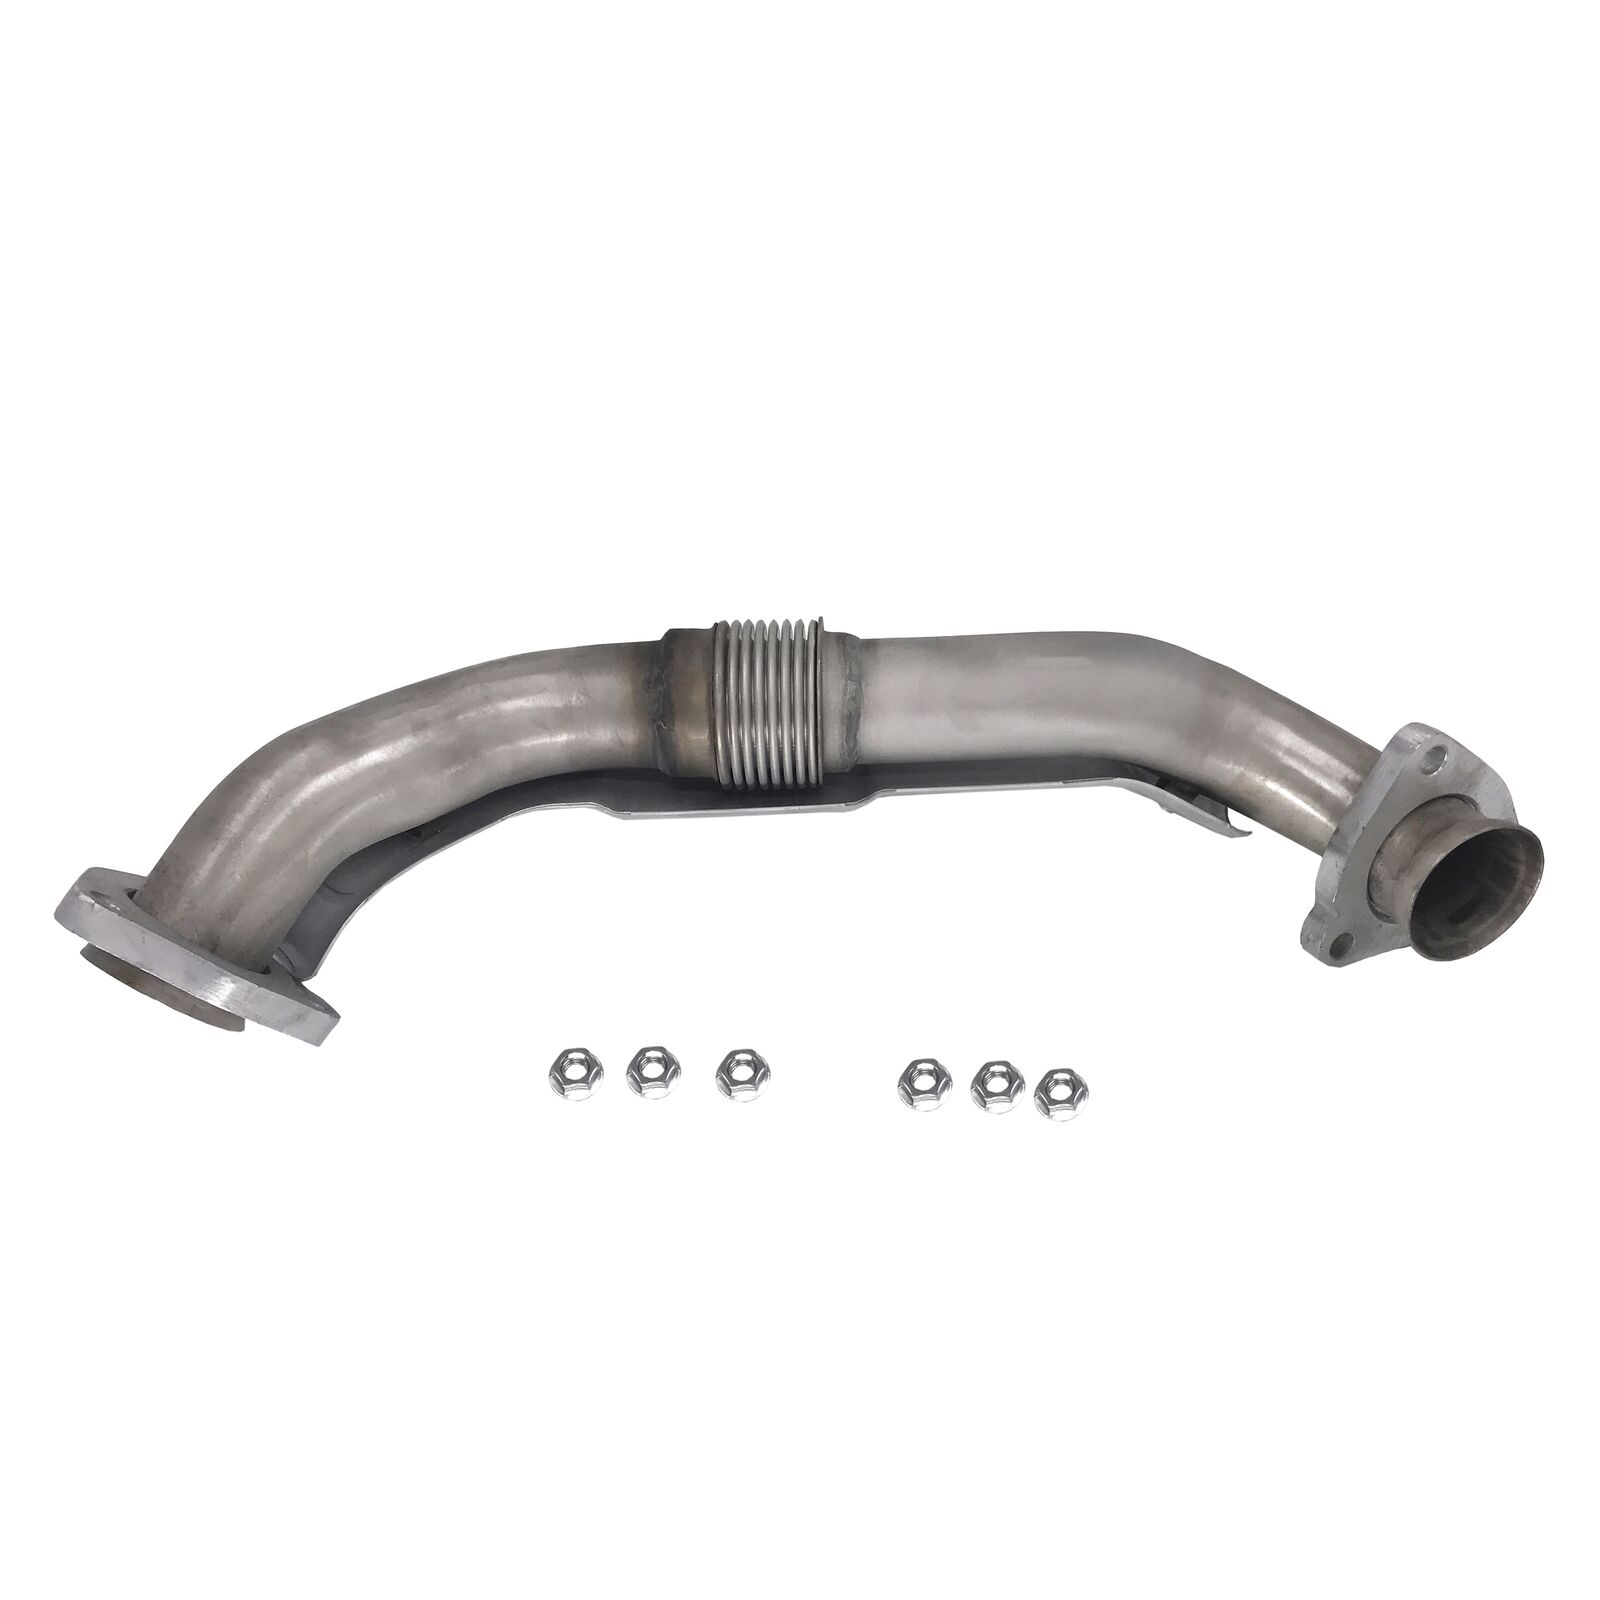 Exhaust Manifold Crossover Pipe For Chevrolet Impala Buick Rendezvous Terraza